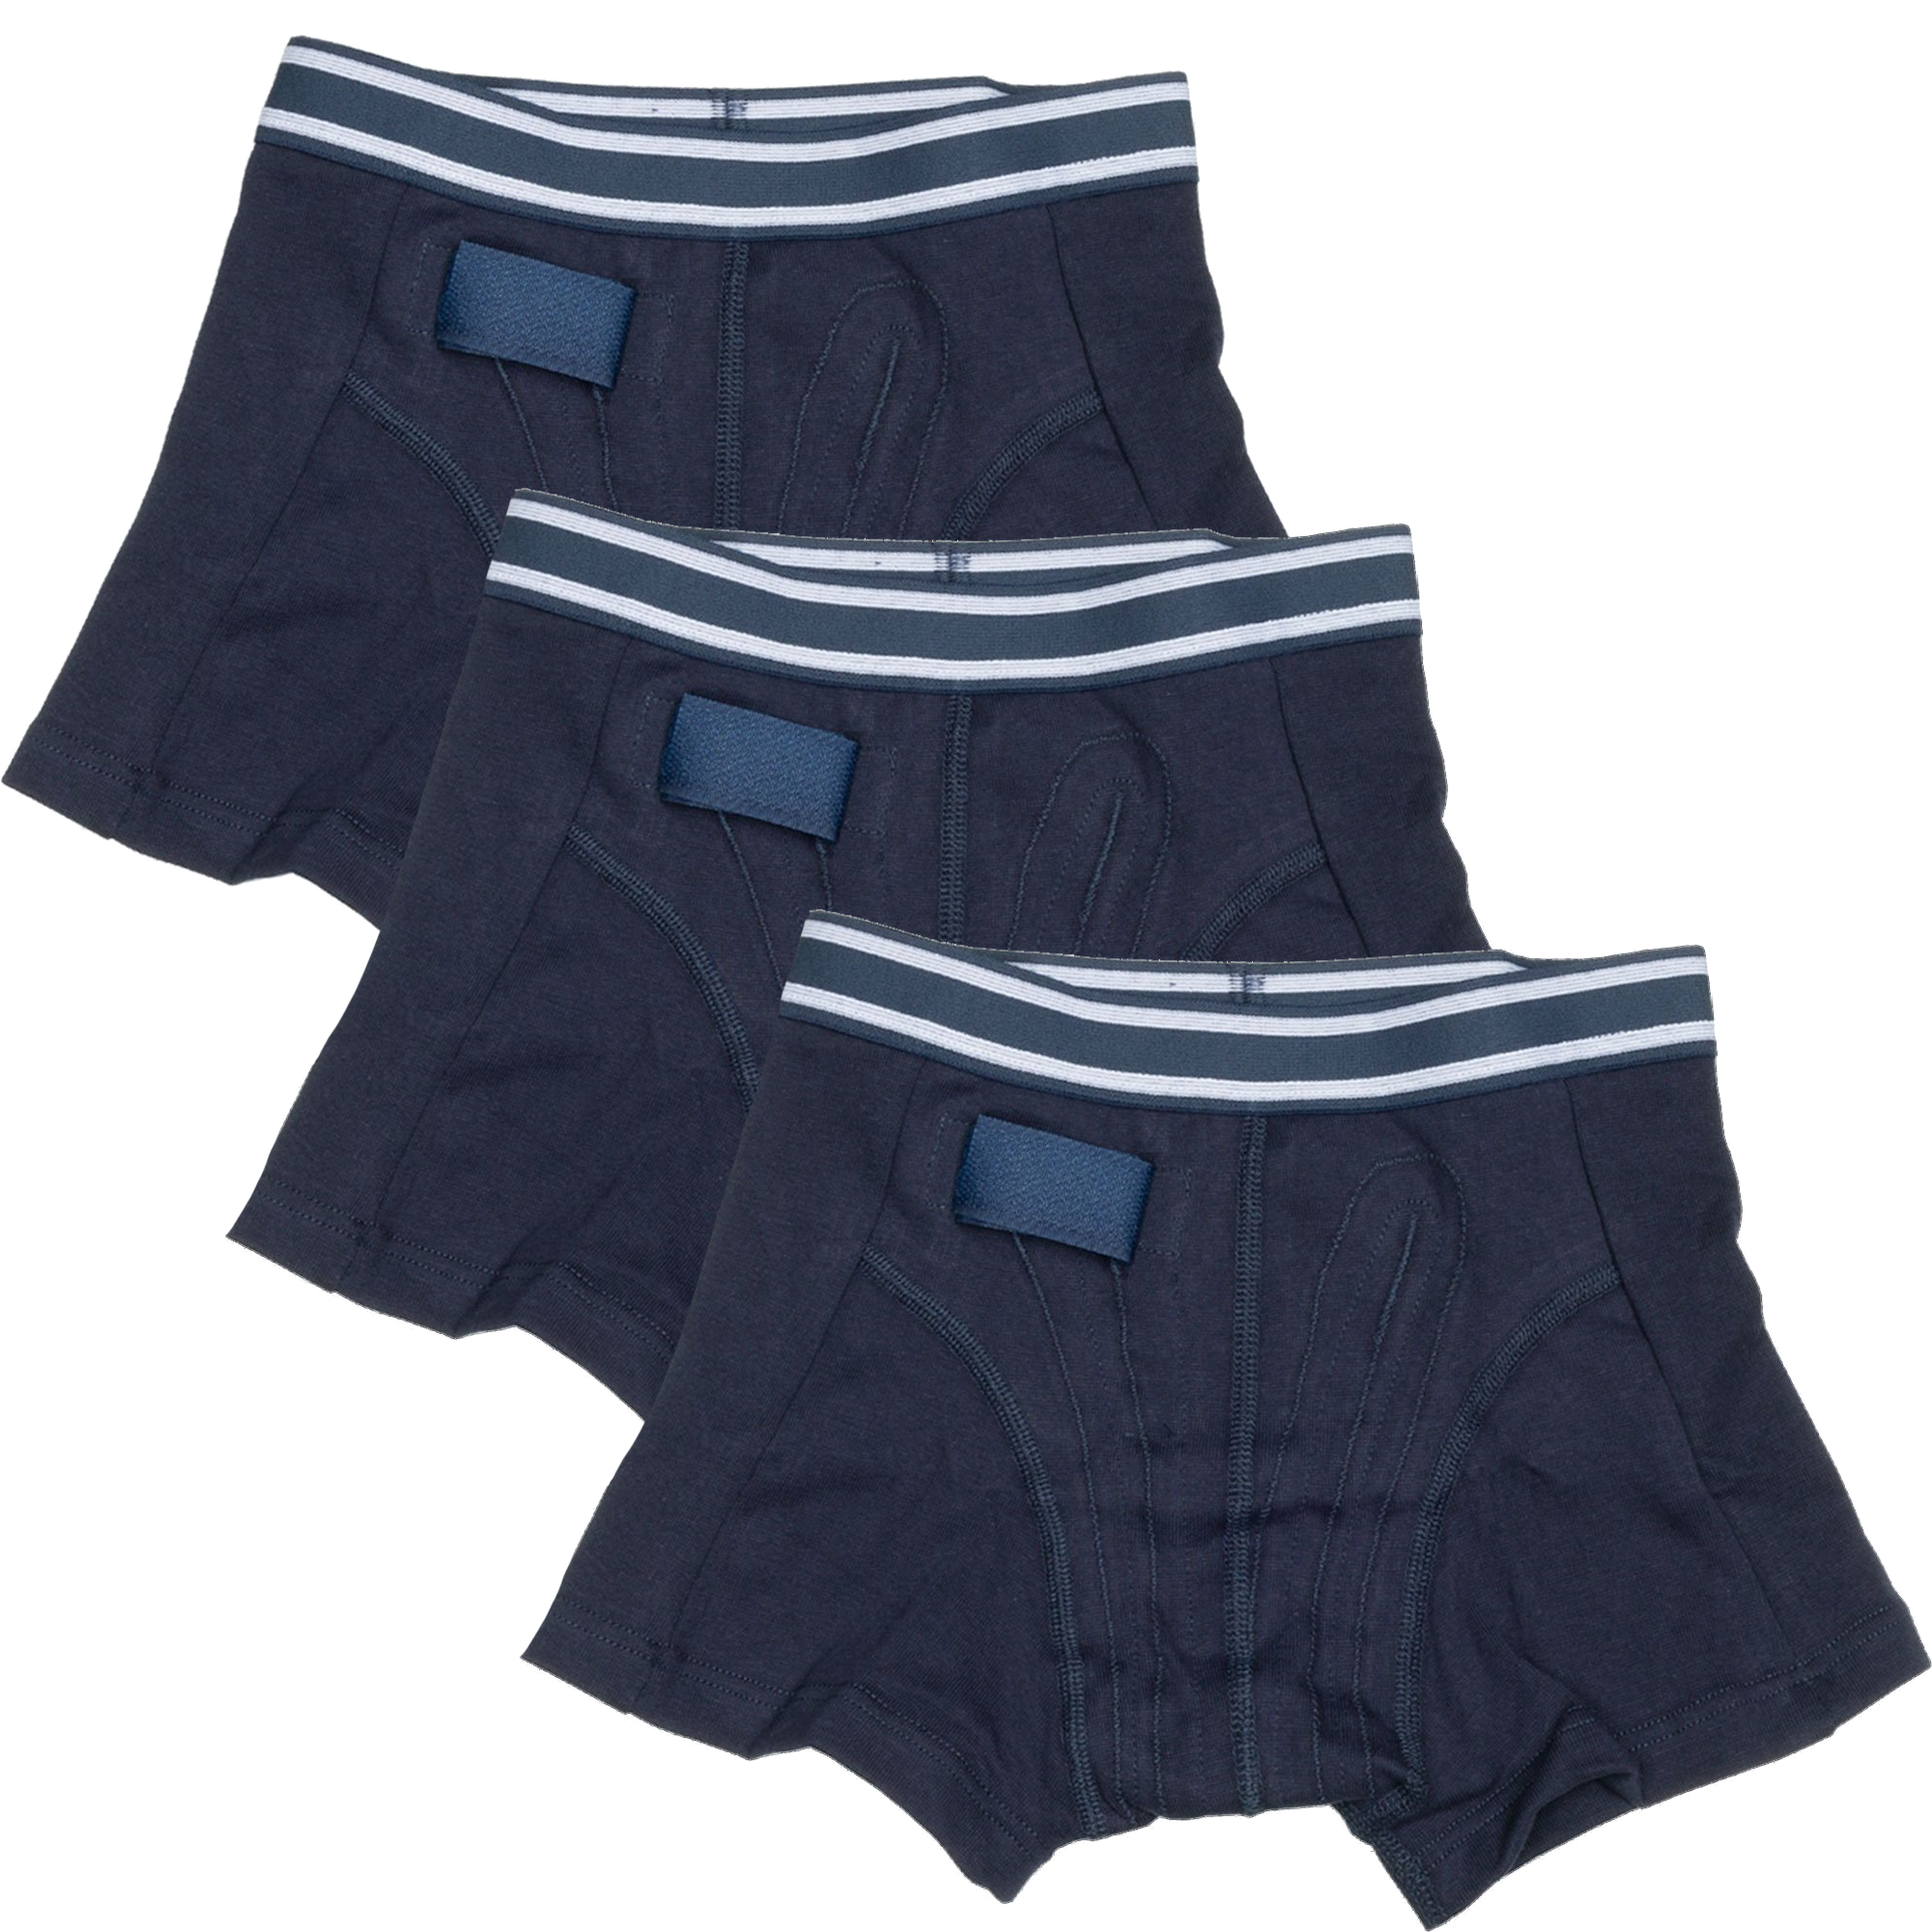 Rodger Wireless Extra Briefs 3 pack